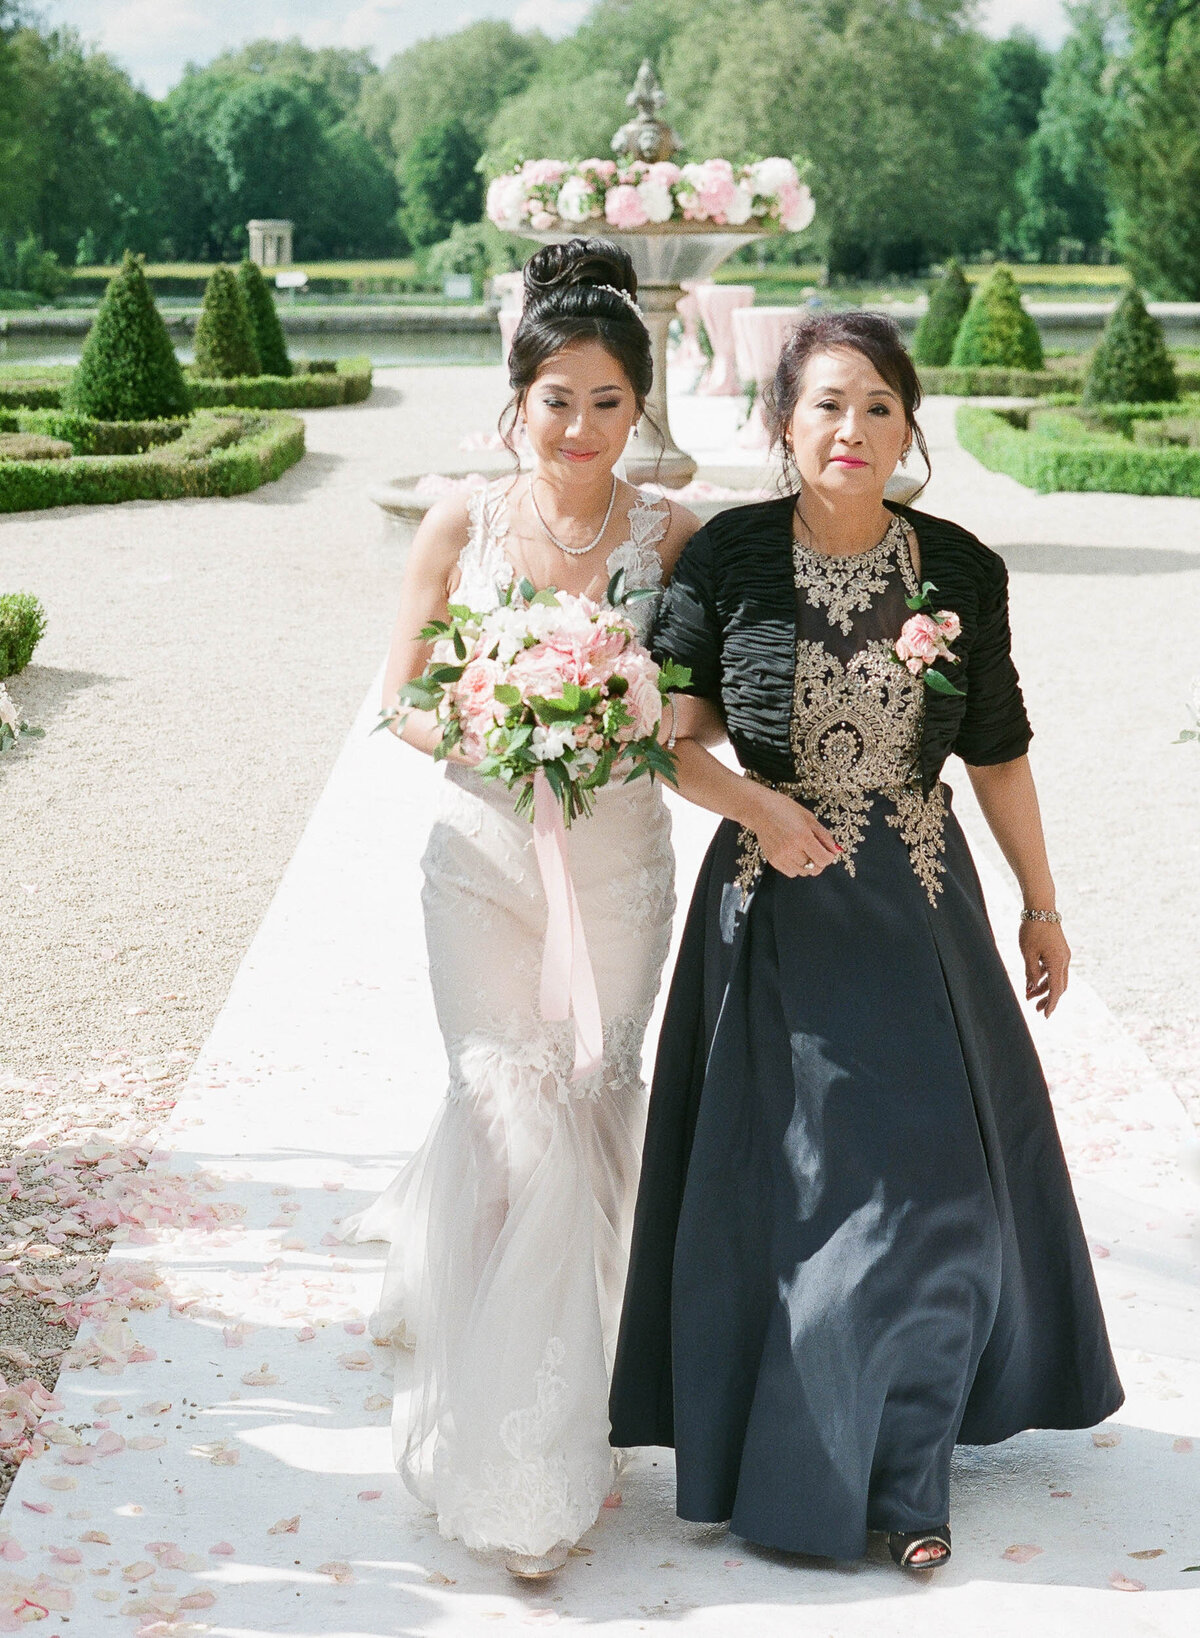 29-Chateau-de-Chantilly-wedding-mother-of-the-bride-Alexandra-Vonk-photography